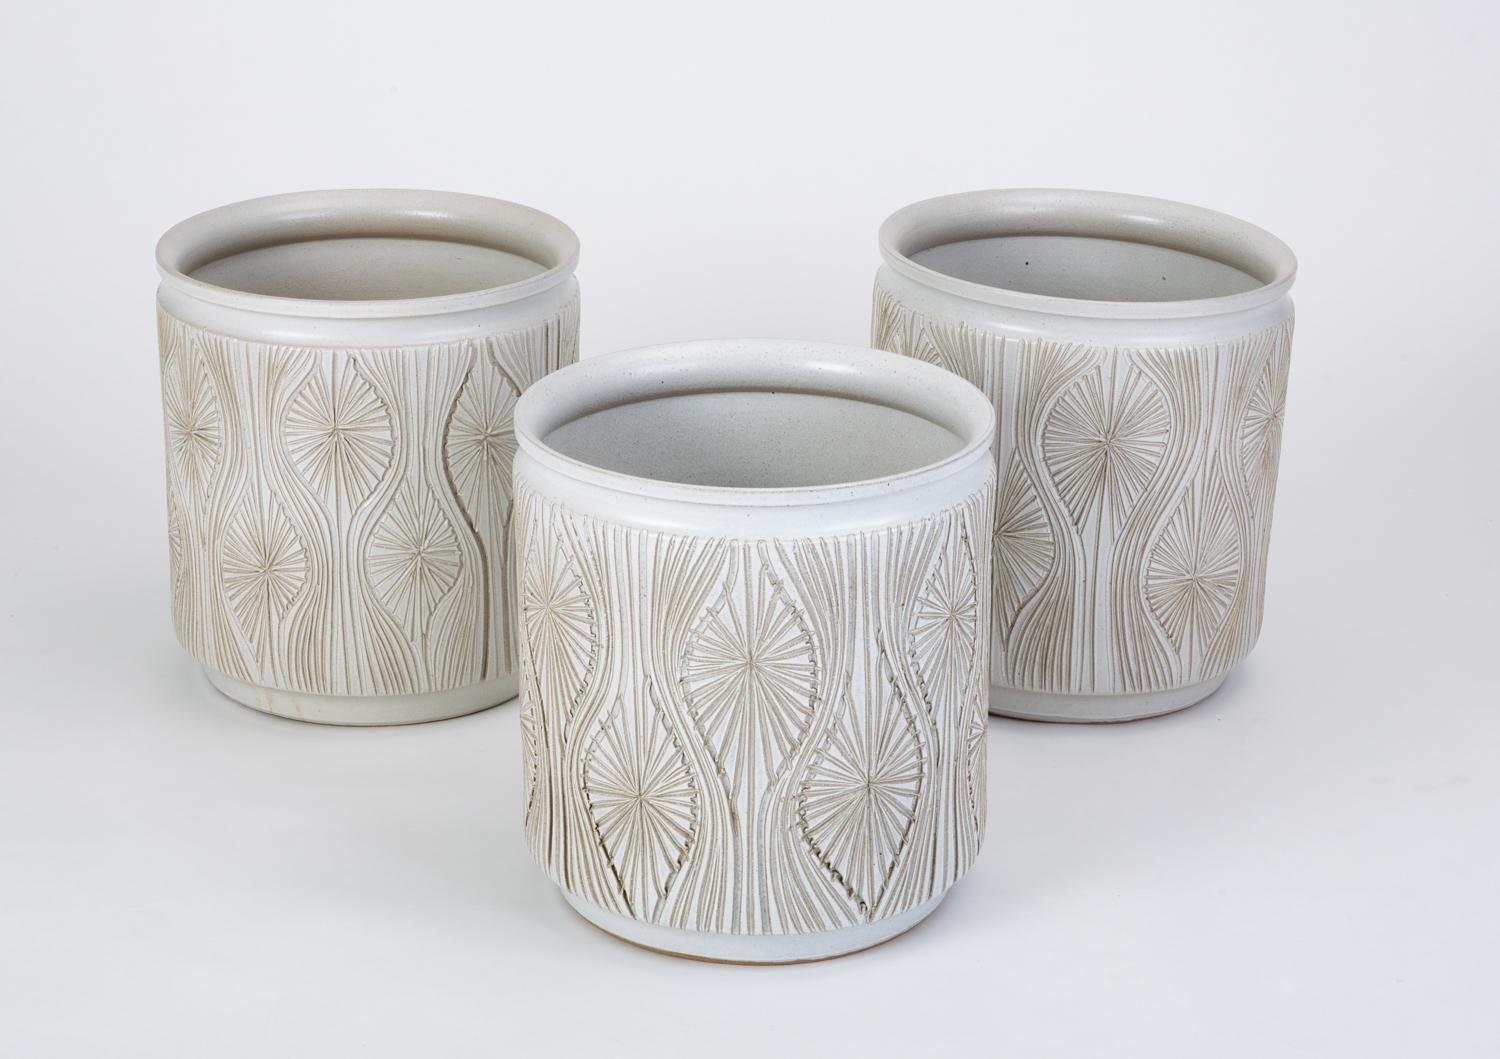 A tall, cylindrical planter from Robert Maxwell and David Cressey’s 1970s collaboration, Earthgender. This example has a slender lip, an allover incised pattern called ‘Teardrop Sunburst’ by the studio and is glazed white. We have three planters